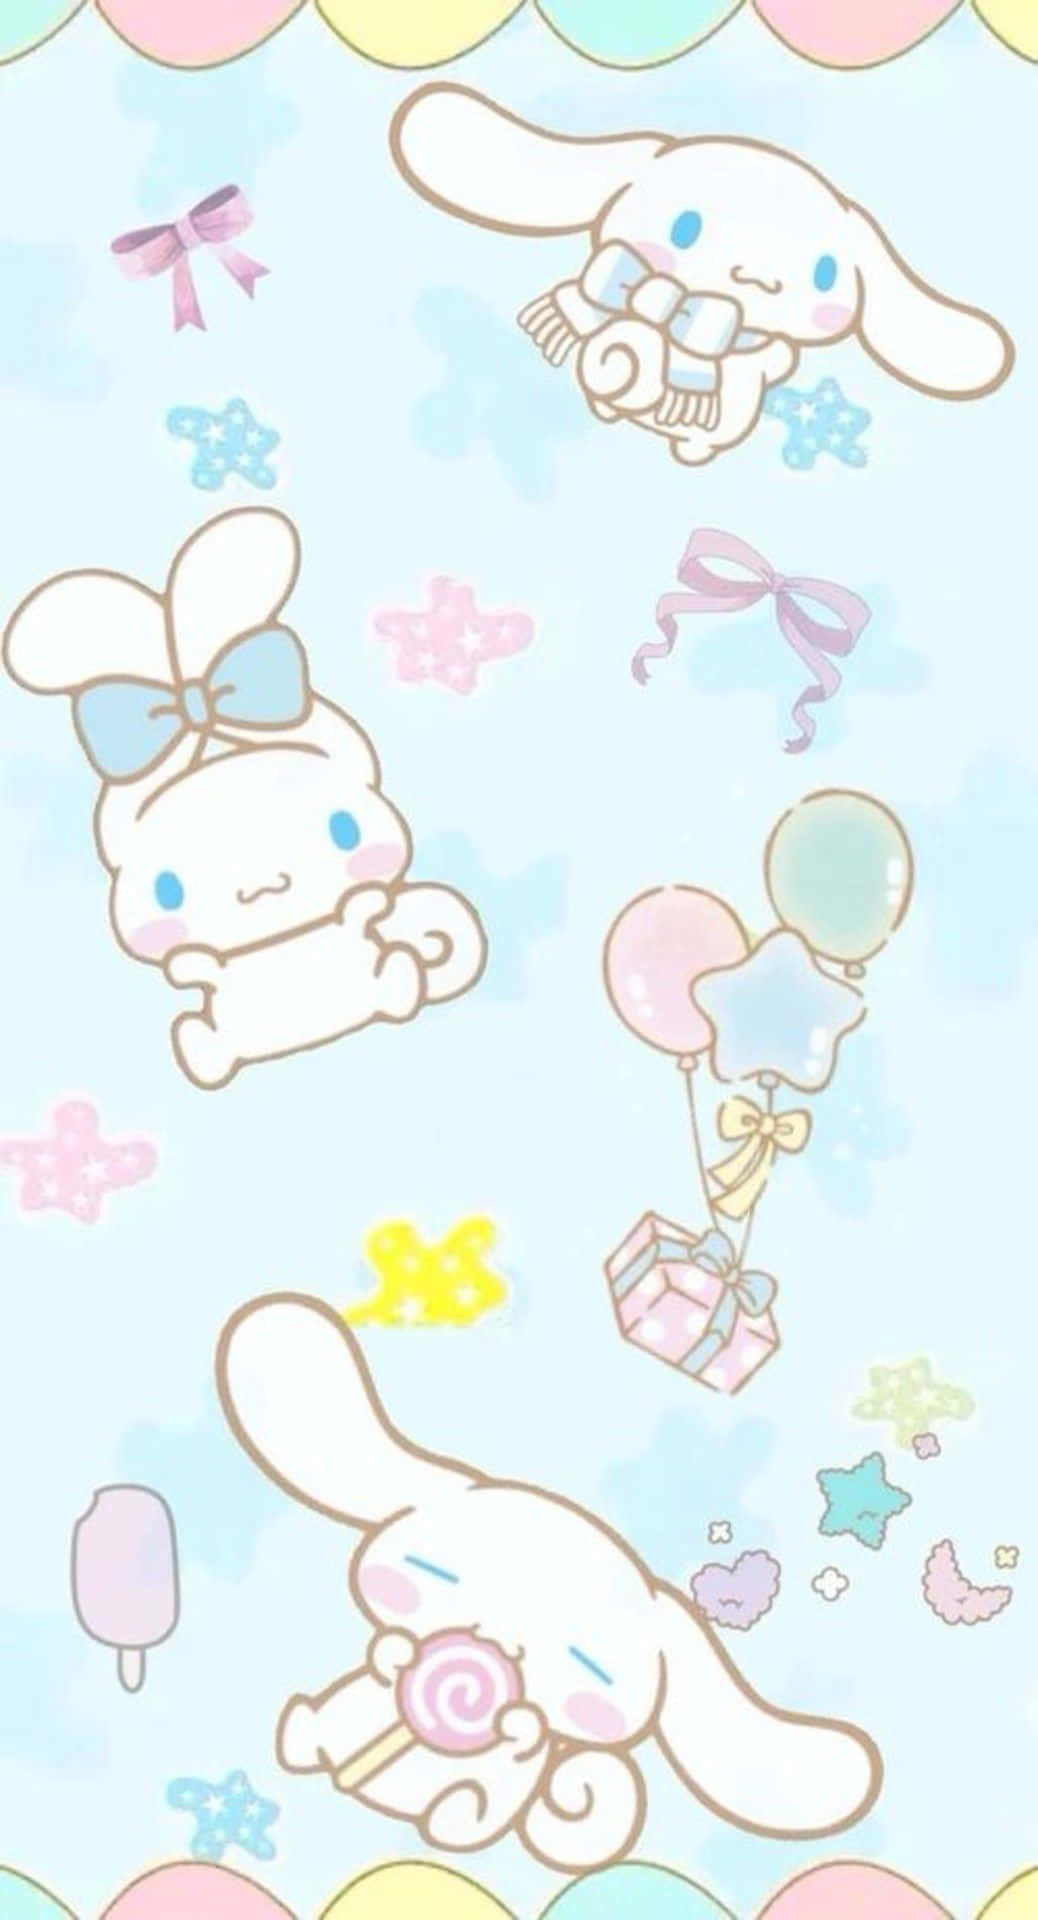 "Stay Connected with Cinnamoroll" Wallpaper